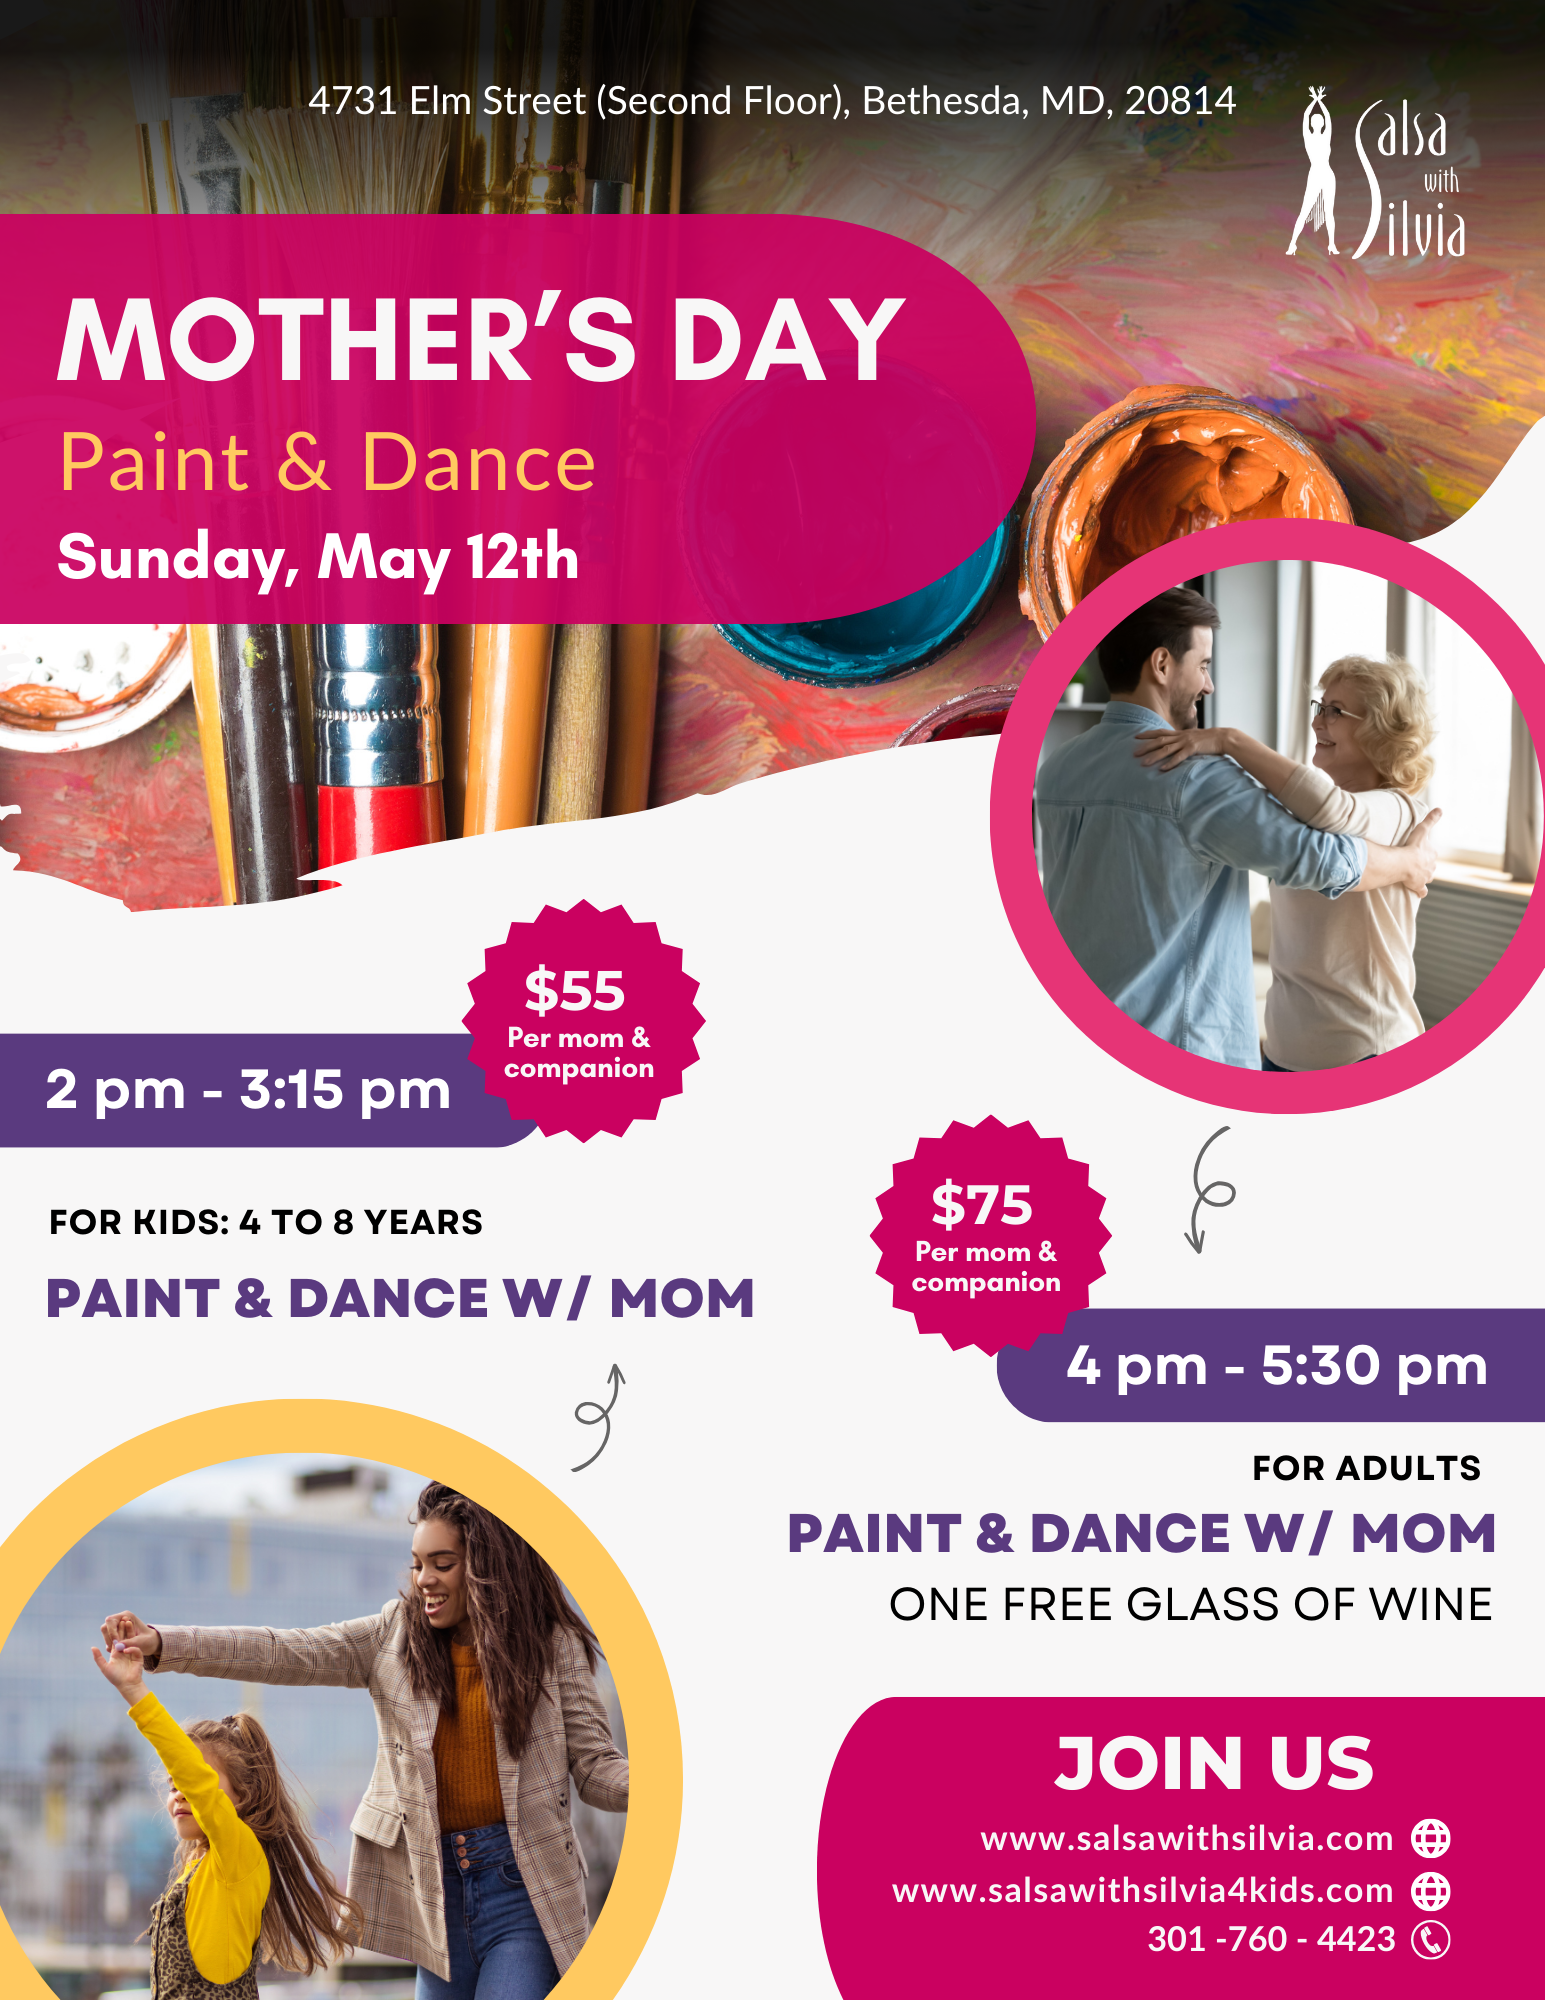 Mother's Day perfect gift: Paint and Dance with mom